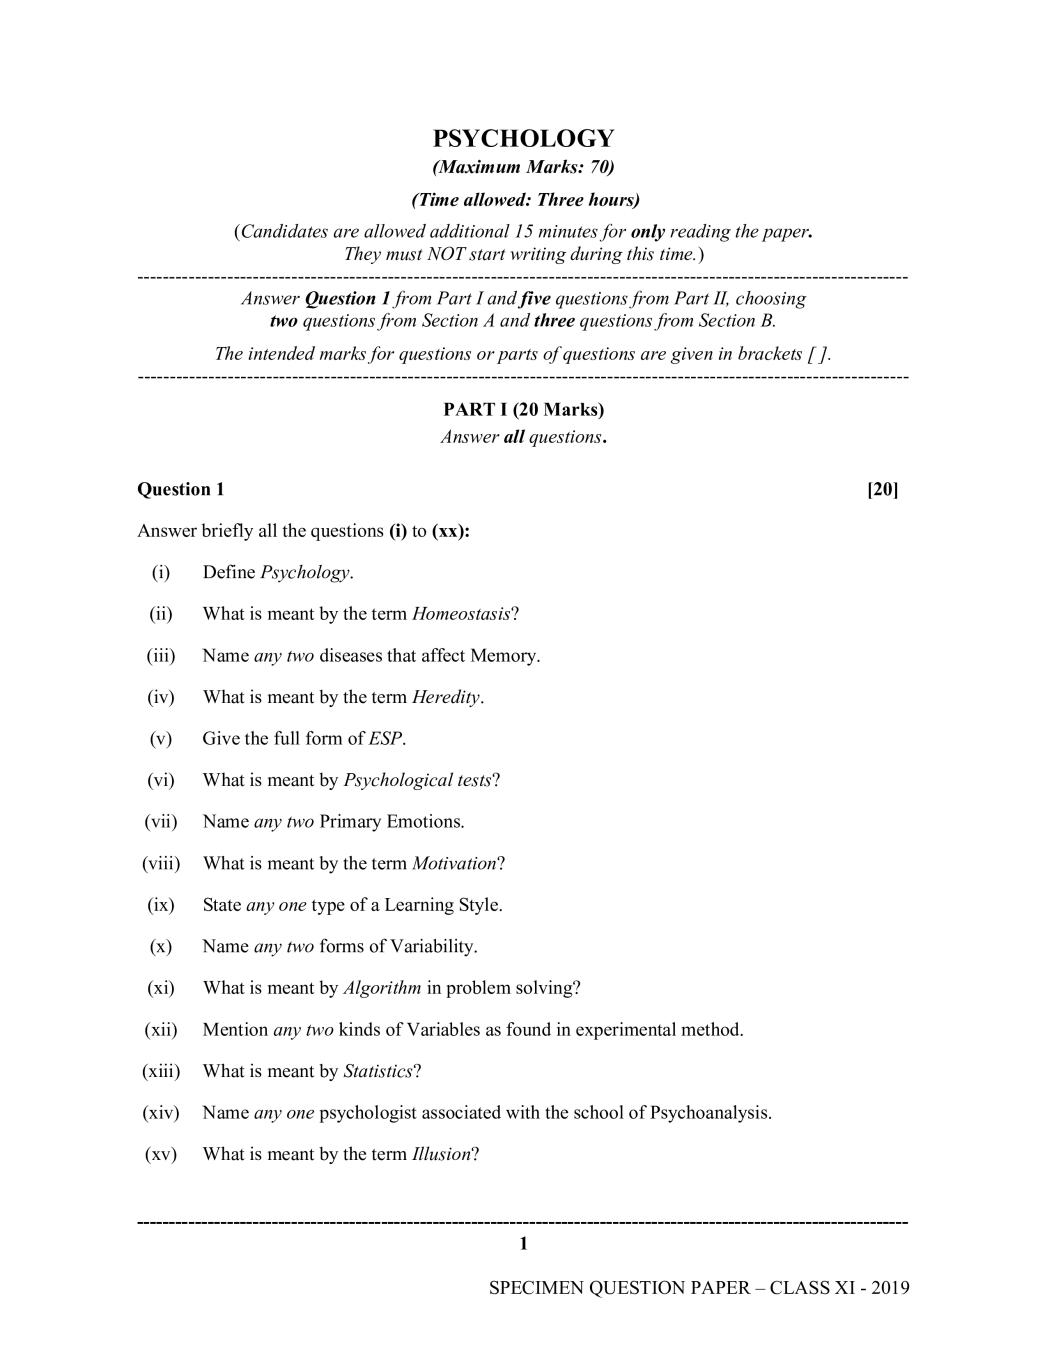 ISC Class 11 Specimen Paper 2019 for Psychology - Page 1